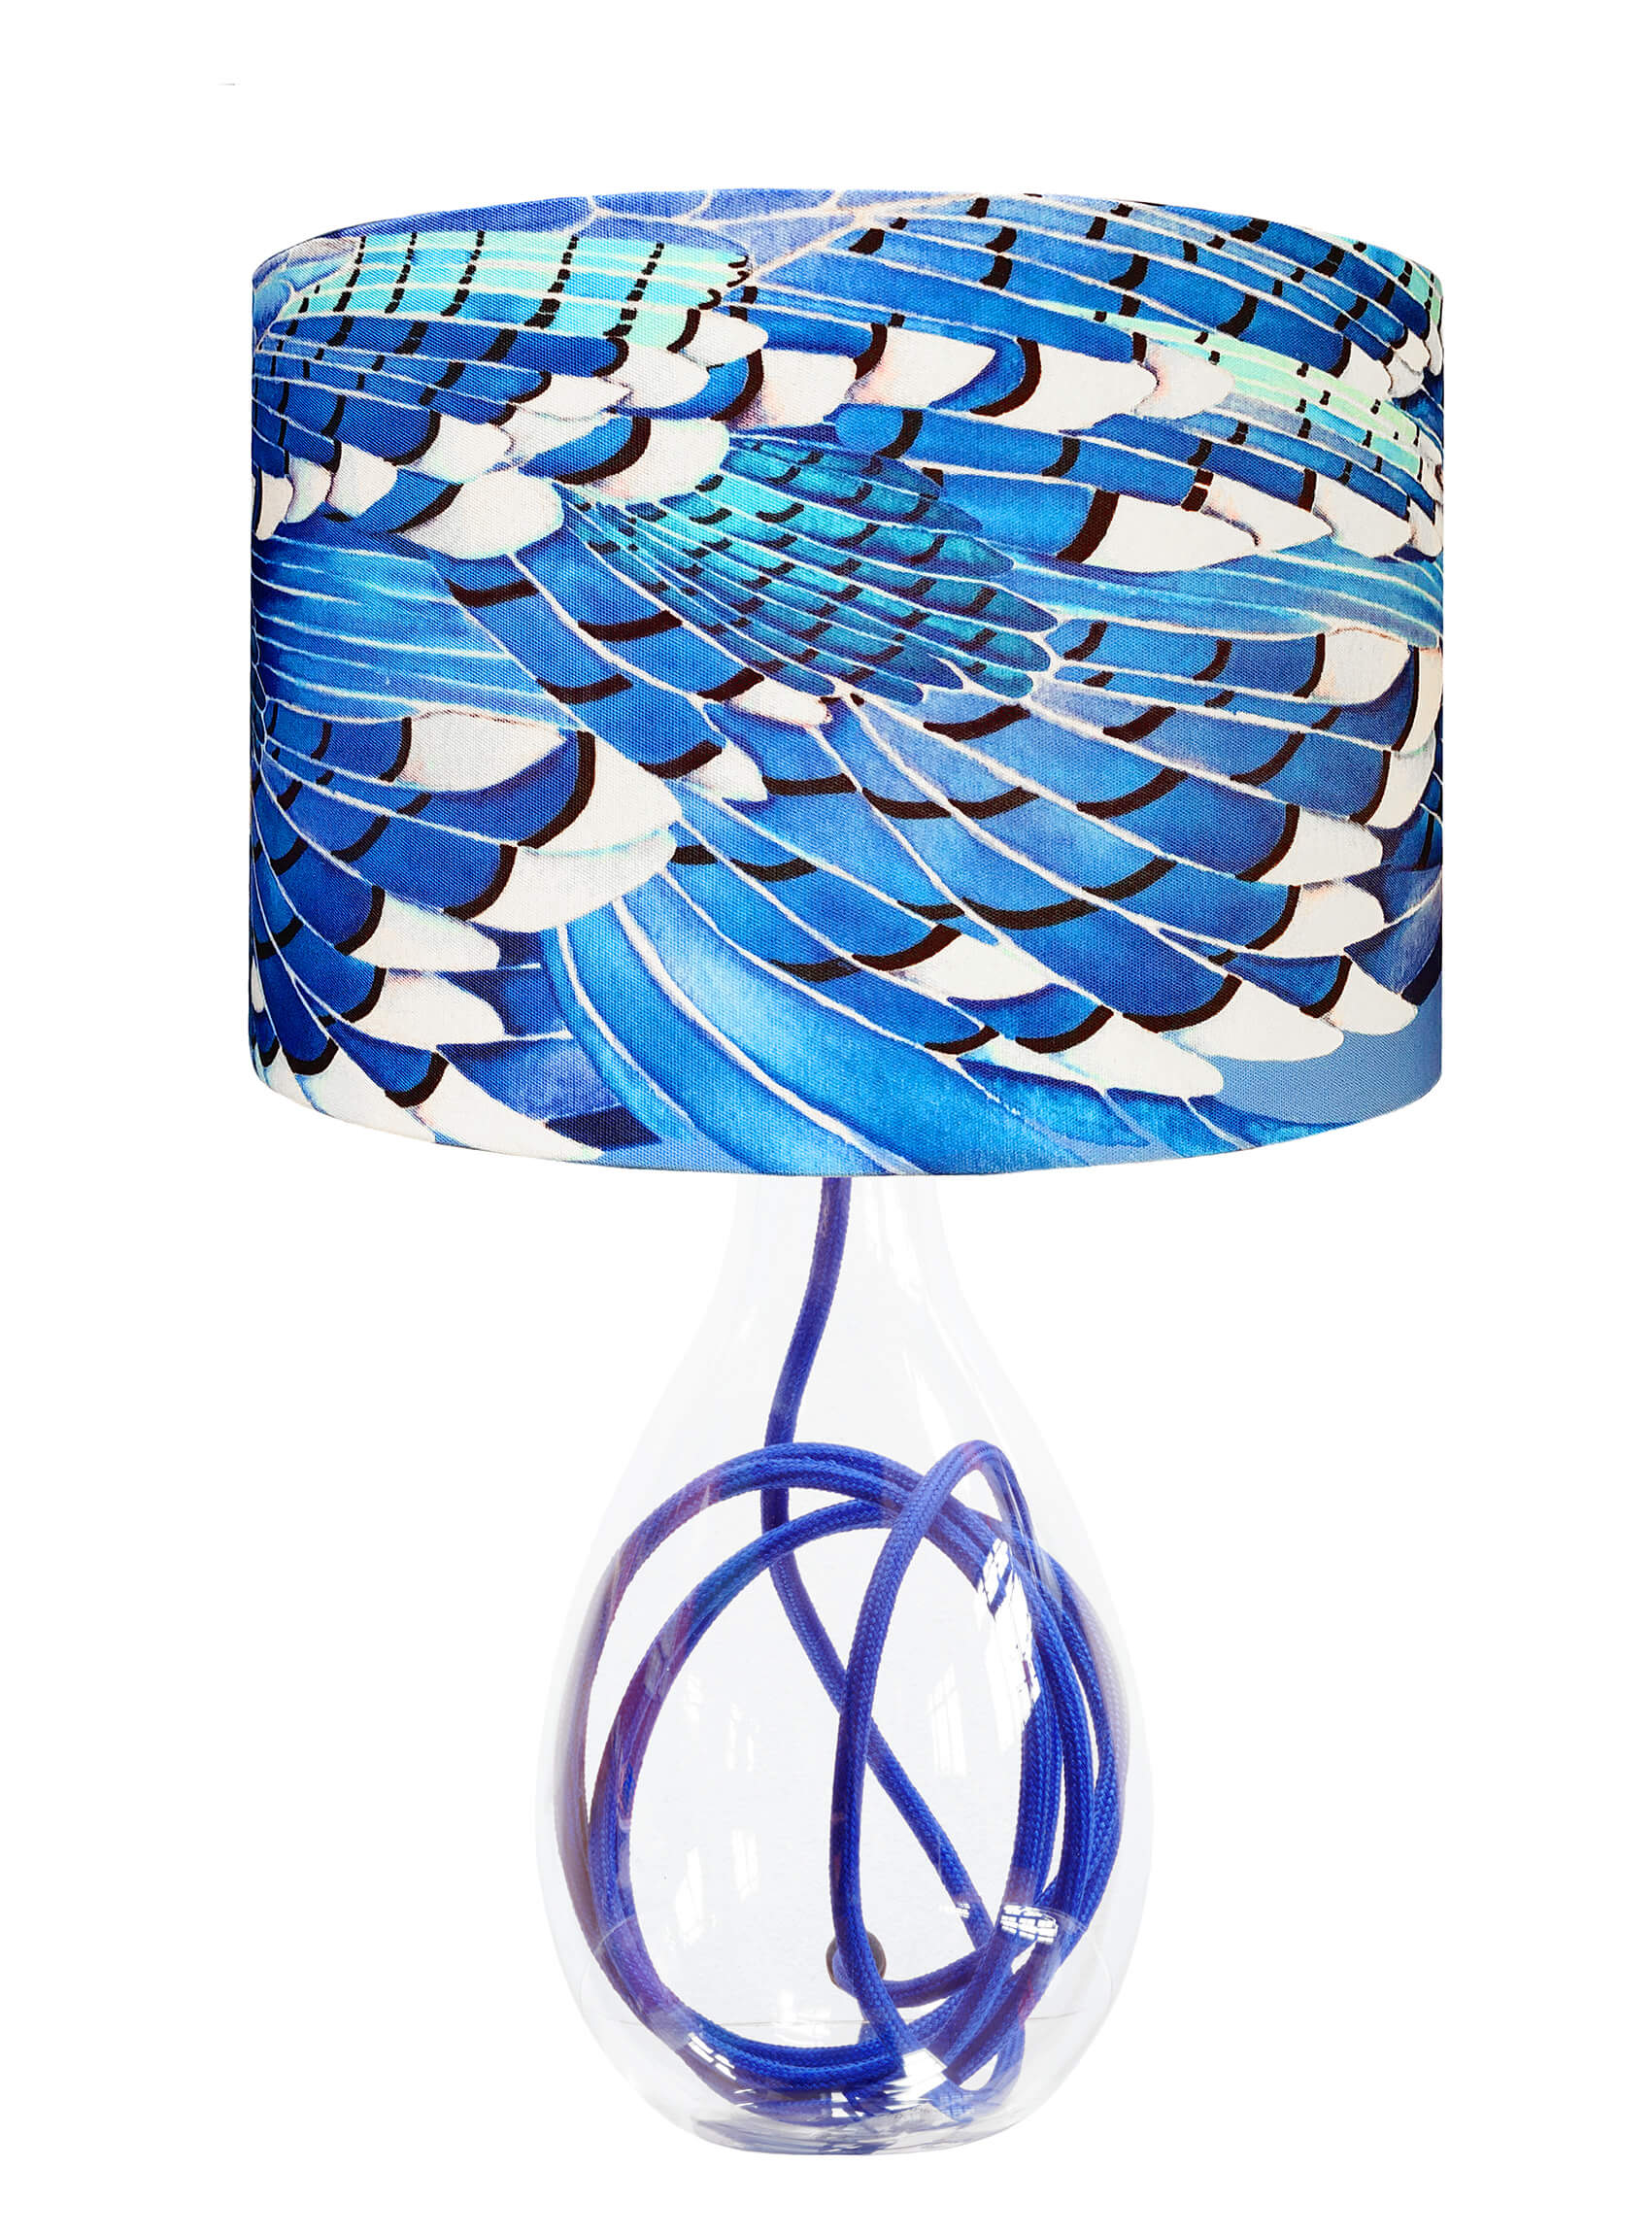 Blue Jay Wing lamp on Royal Blue flex by Anna Jacobs - medium size